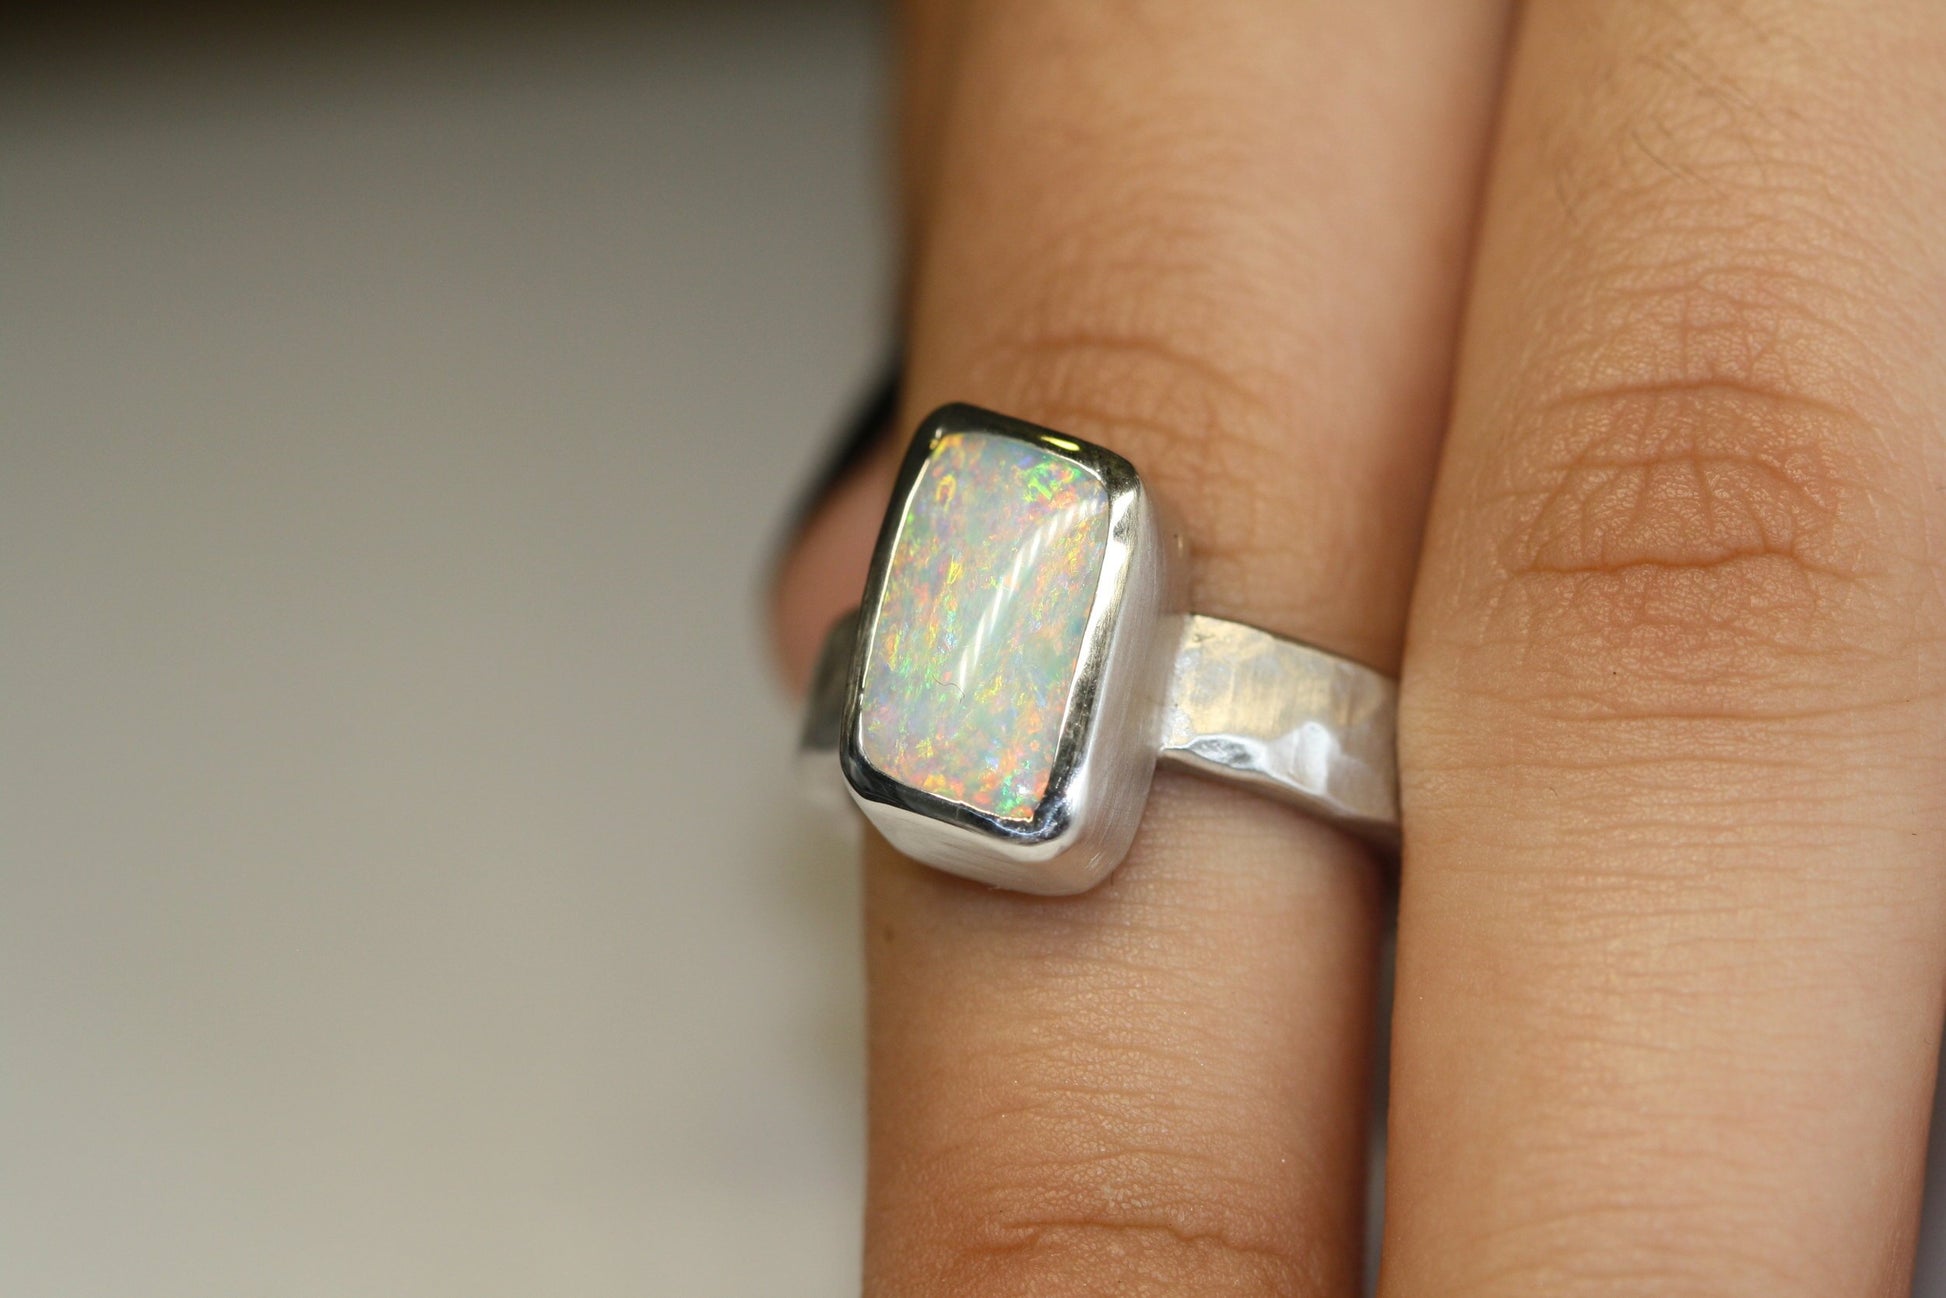 Photo on hand. Queensland Boulder Opal Sterling Silver Ring. Light opal hand crafted in Brisbane Studio using ethically sourced materials. Wide textured band with a hammered finish. Stone is white pink and green. 